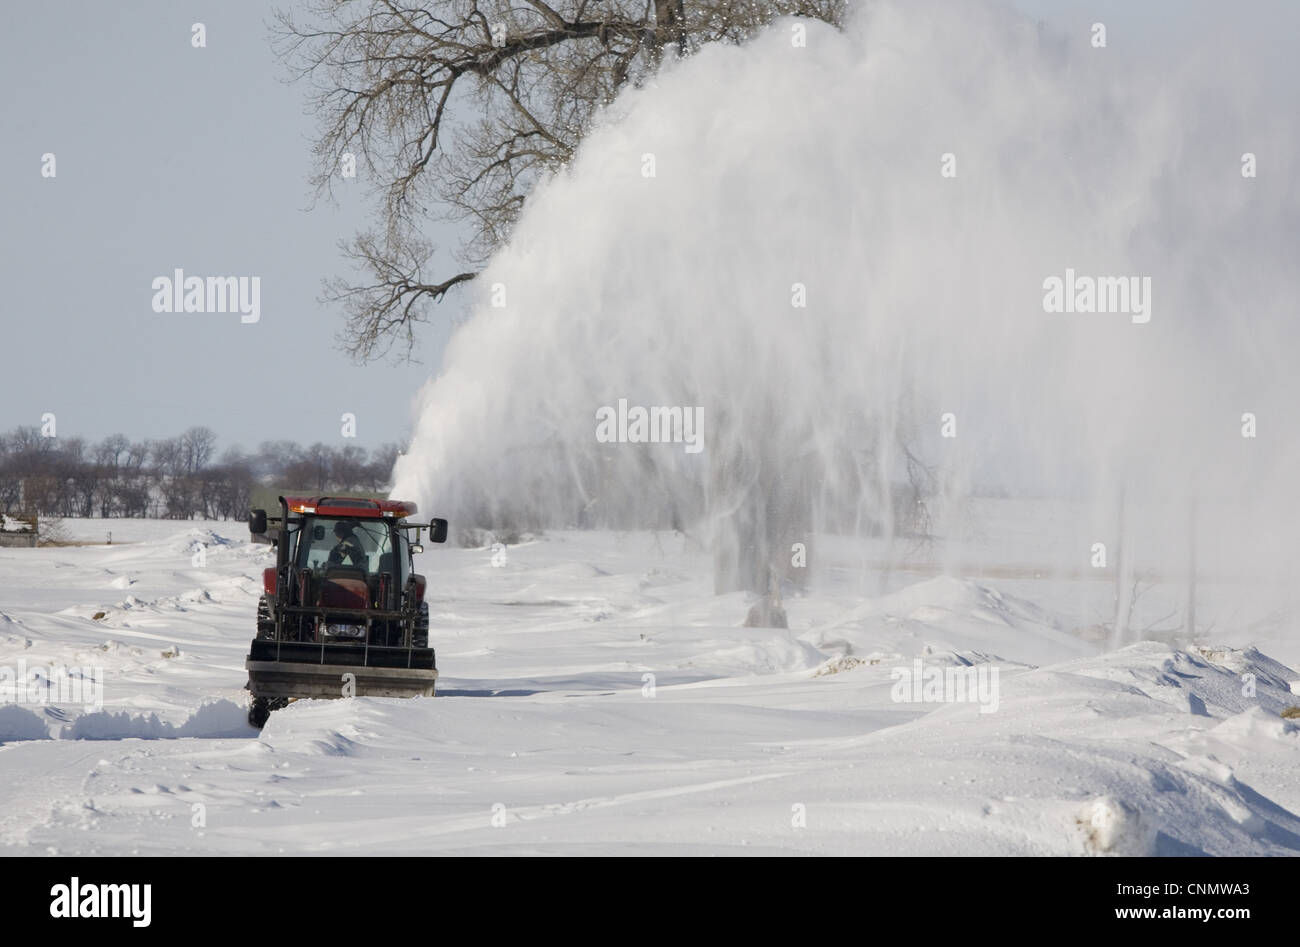 Tractor with snow blower, blowing snow from blocked rural road, North Dakota, U.S.A., february Stock Photo